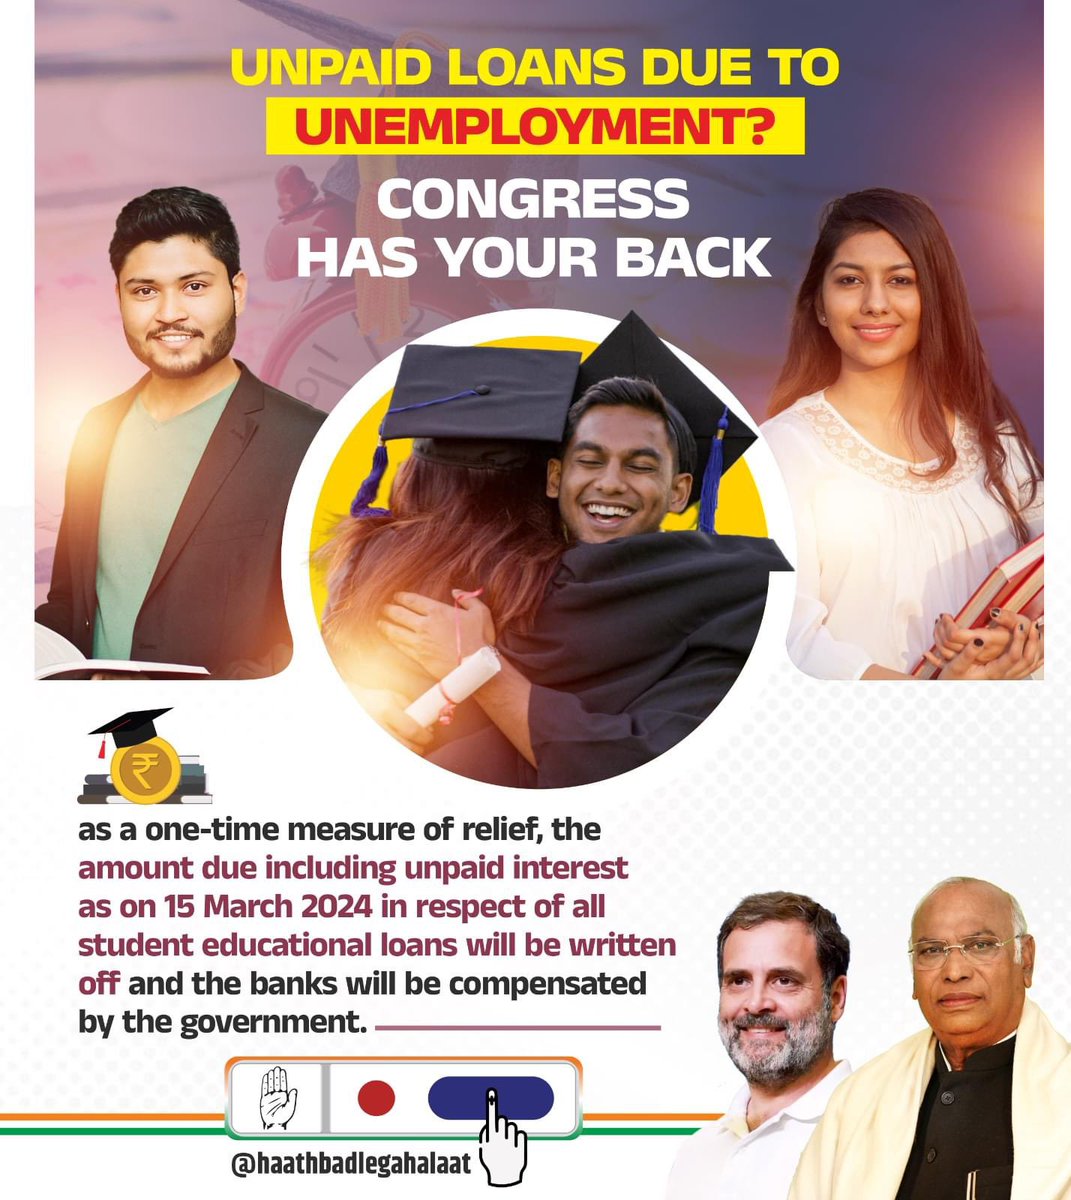 Congress will provide relief for students burdened byeducational loans. All outstanding amounts, including interest up to March 152024will be written off, with banks compensated by the government A significant step towards easing financial pressures onstudents

#StudentDebtRelief